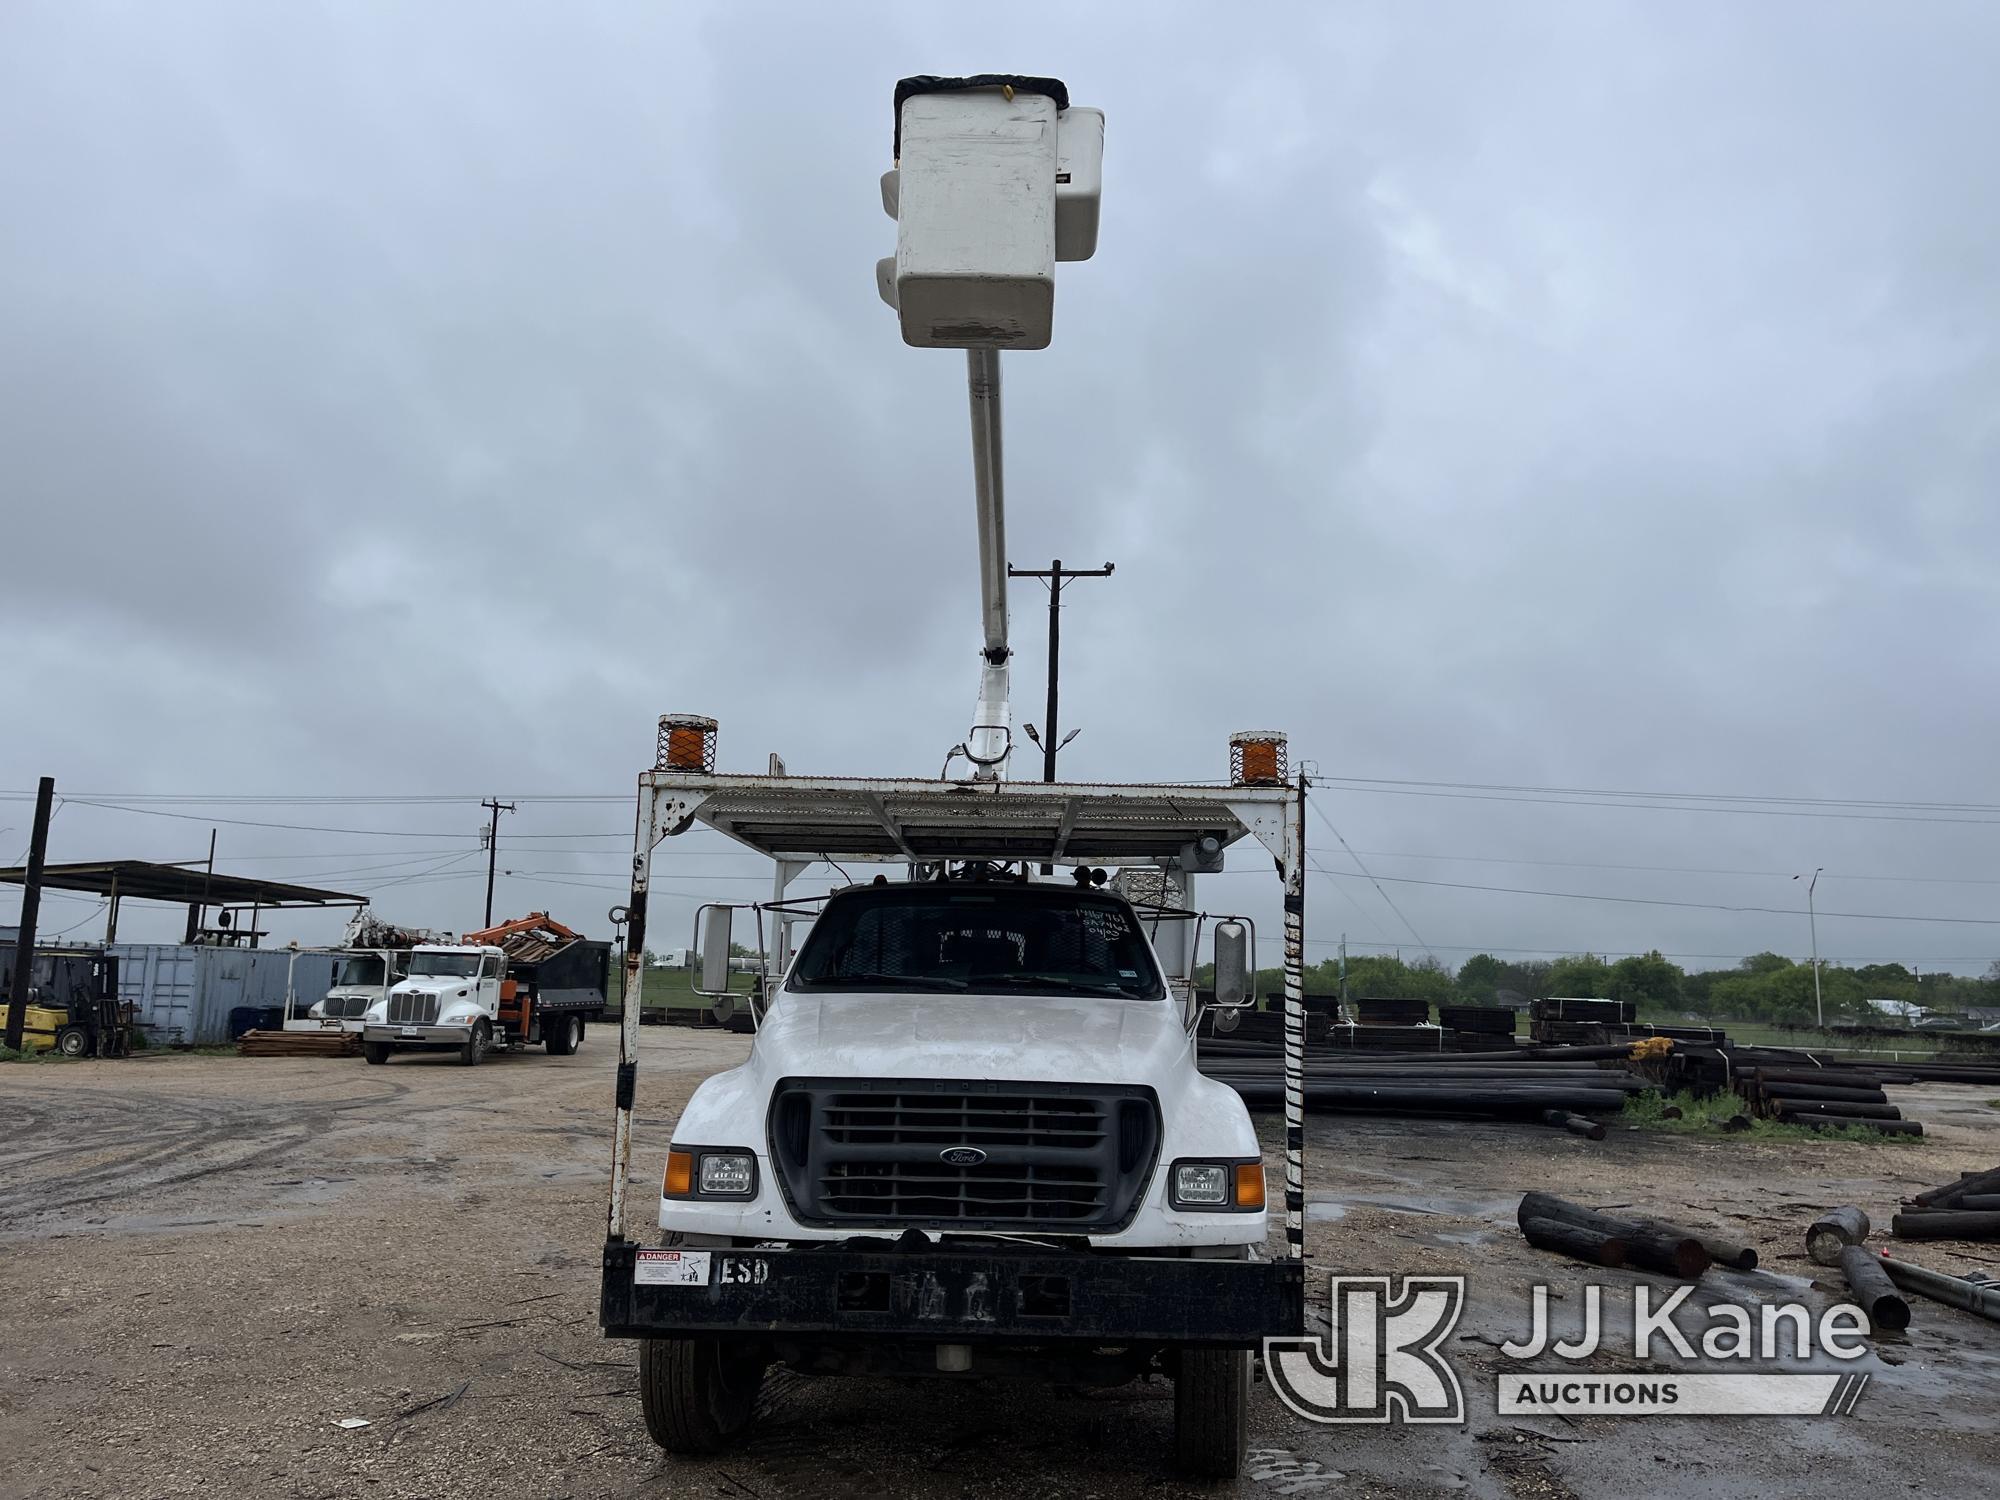 (San Antonio, TX) Terex/Telelect HiRanger 5FC-55, Bucket Truck mounted behind cab on 2003 Ford F750